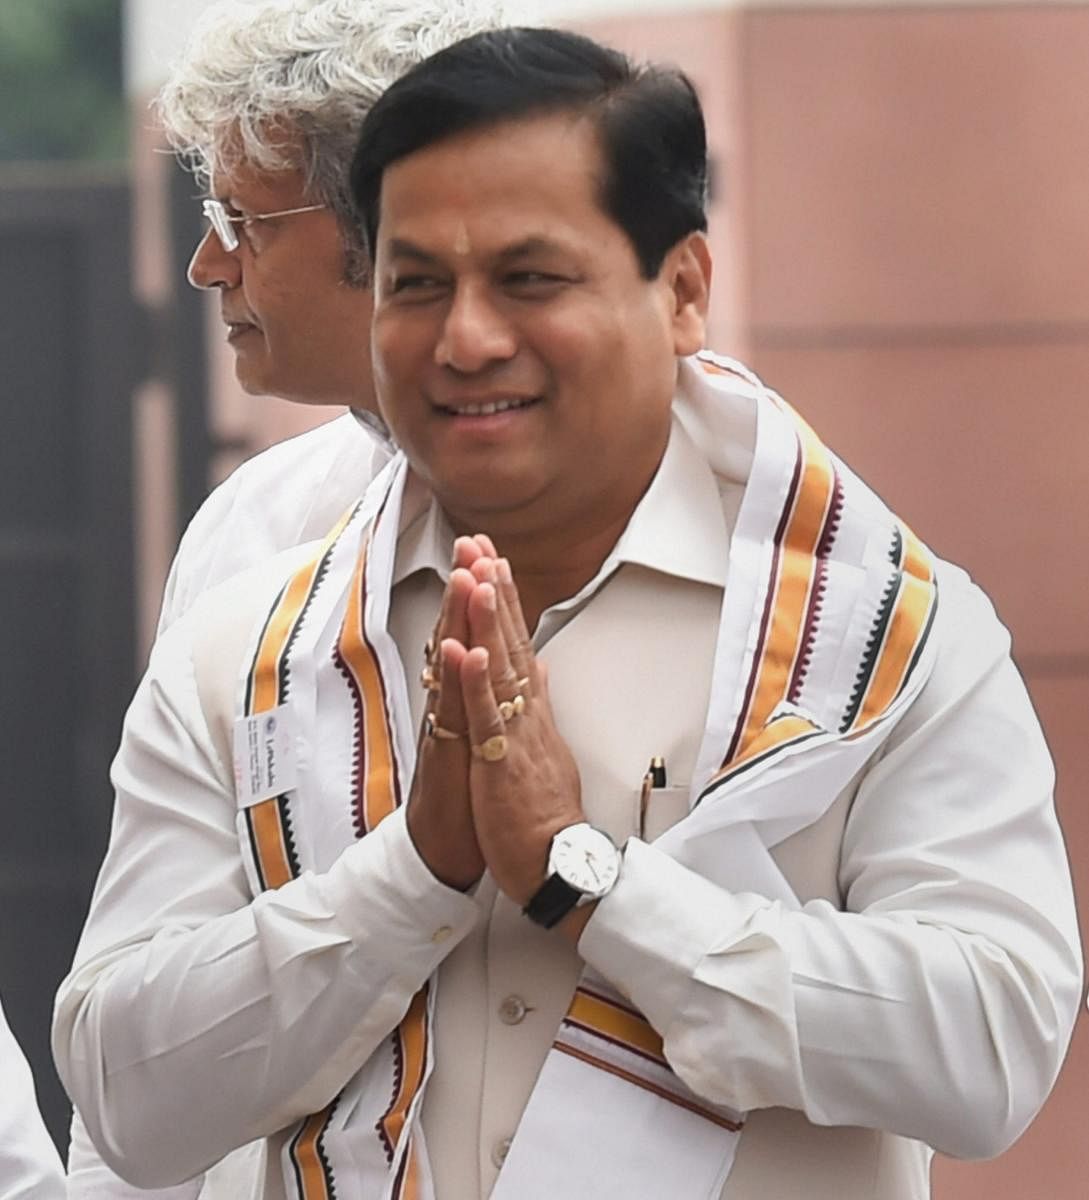 Assam Chief Minister Sarbananda Sonowal said, "The NRC should be implemented in all states. This is a document which can protect all Indians. Those who will be excluded from the NRC in Assam can go to other states. So we will have to take a strong step."